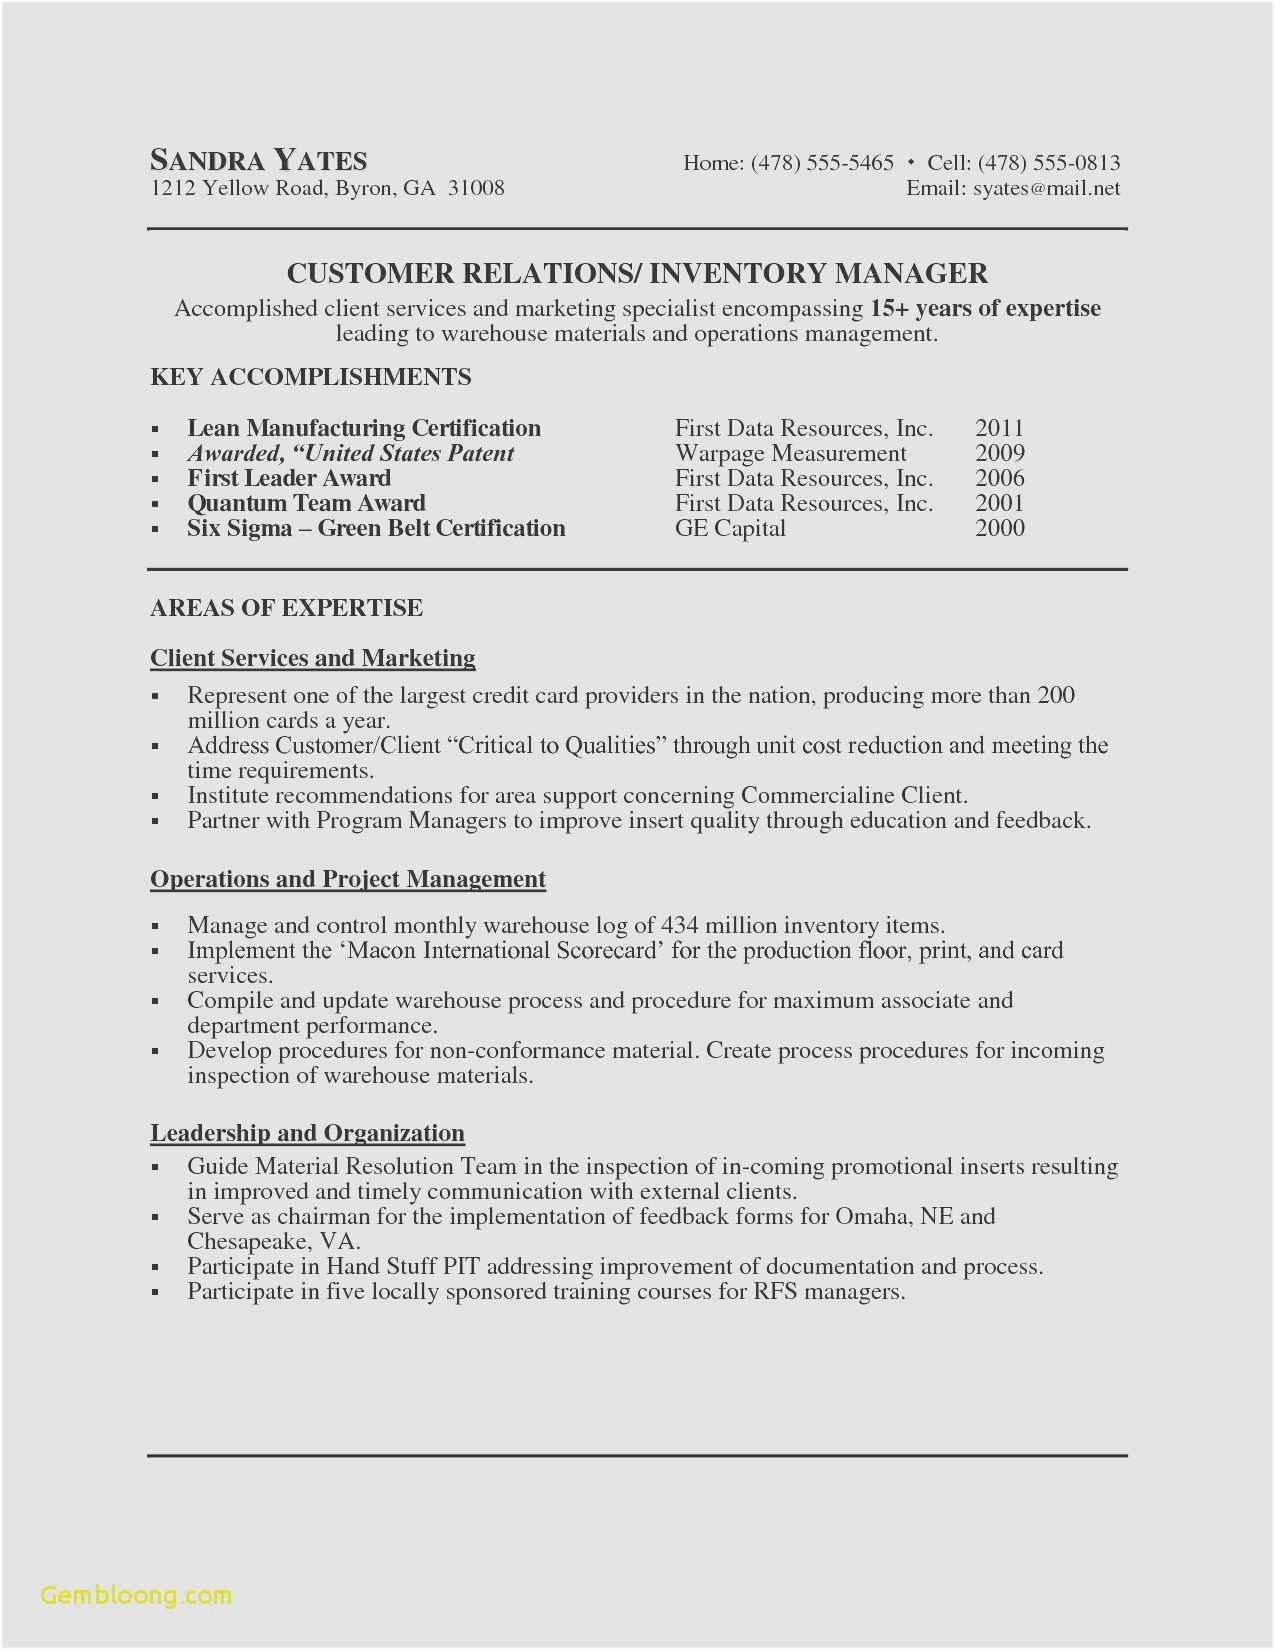 Sales and Marketing Resume Sample Download Free Sales and Marketing Manager Resume Sample Doc Resume